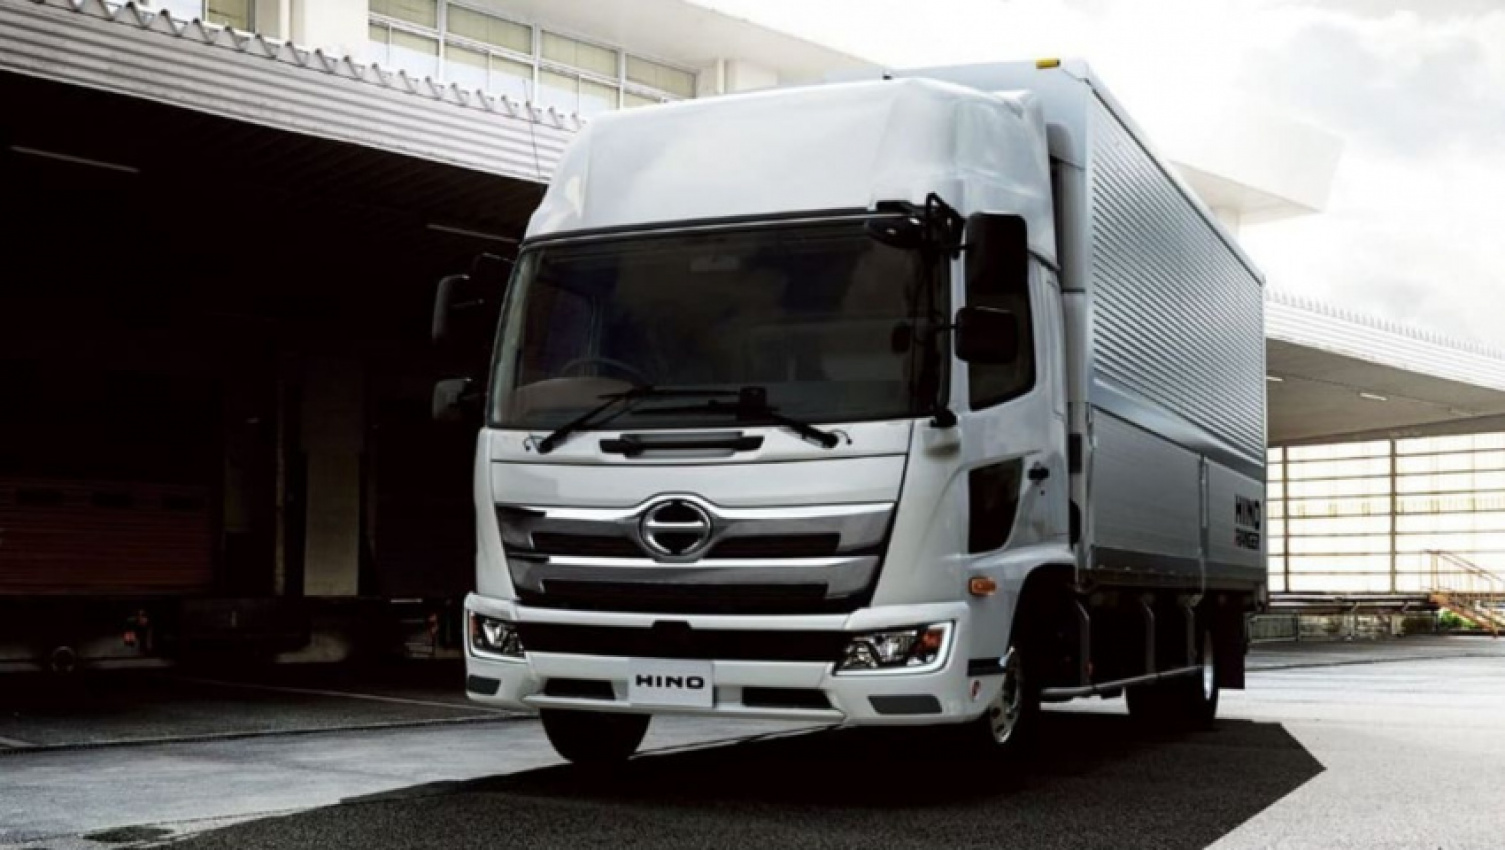 autos, cars, toyota, commercial, hino commercial range, hino news, industry news, light trucks, toyota commercial range, toyota news, hino admits to diesel emissions cheating: toyota-owned brand pulls models from sale in japan as investigation highlights testing irregularities